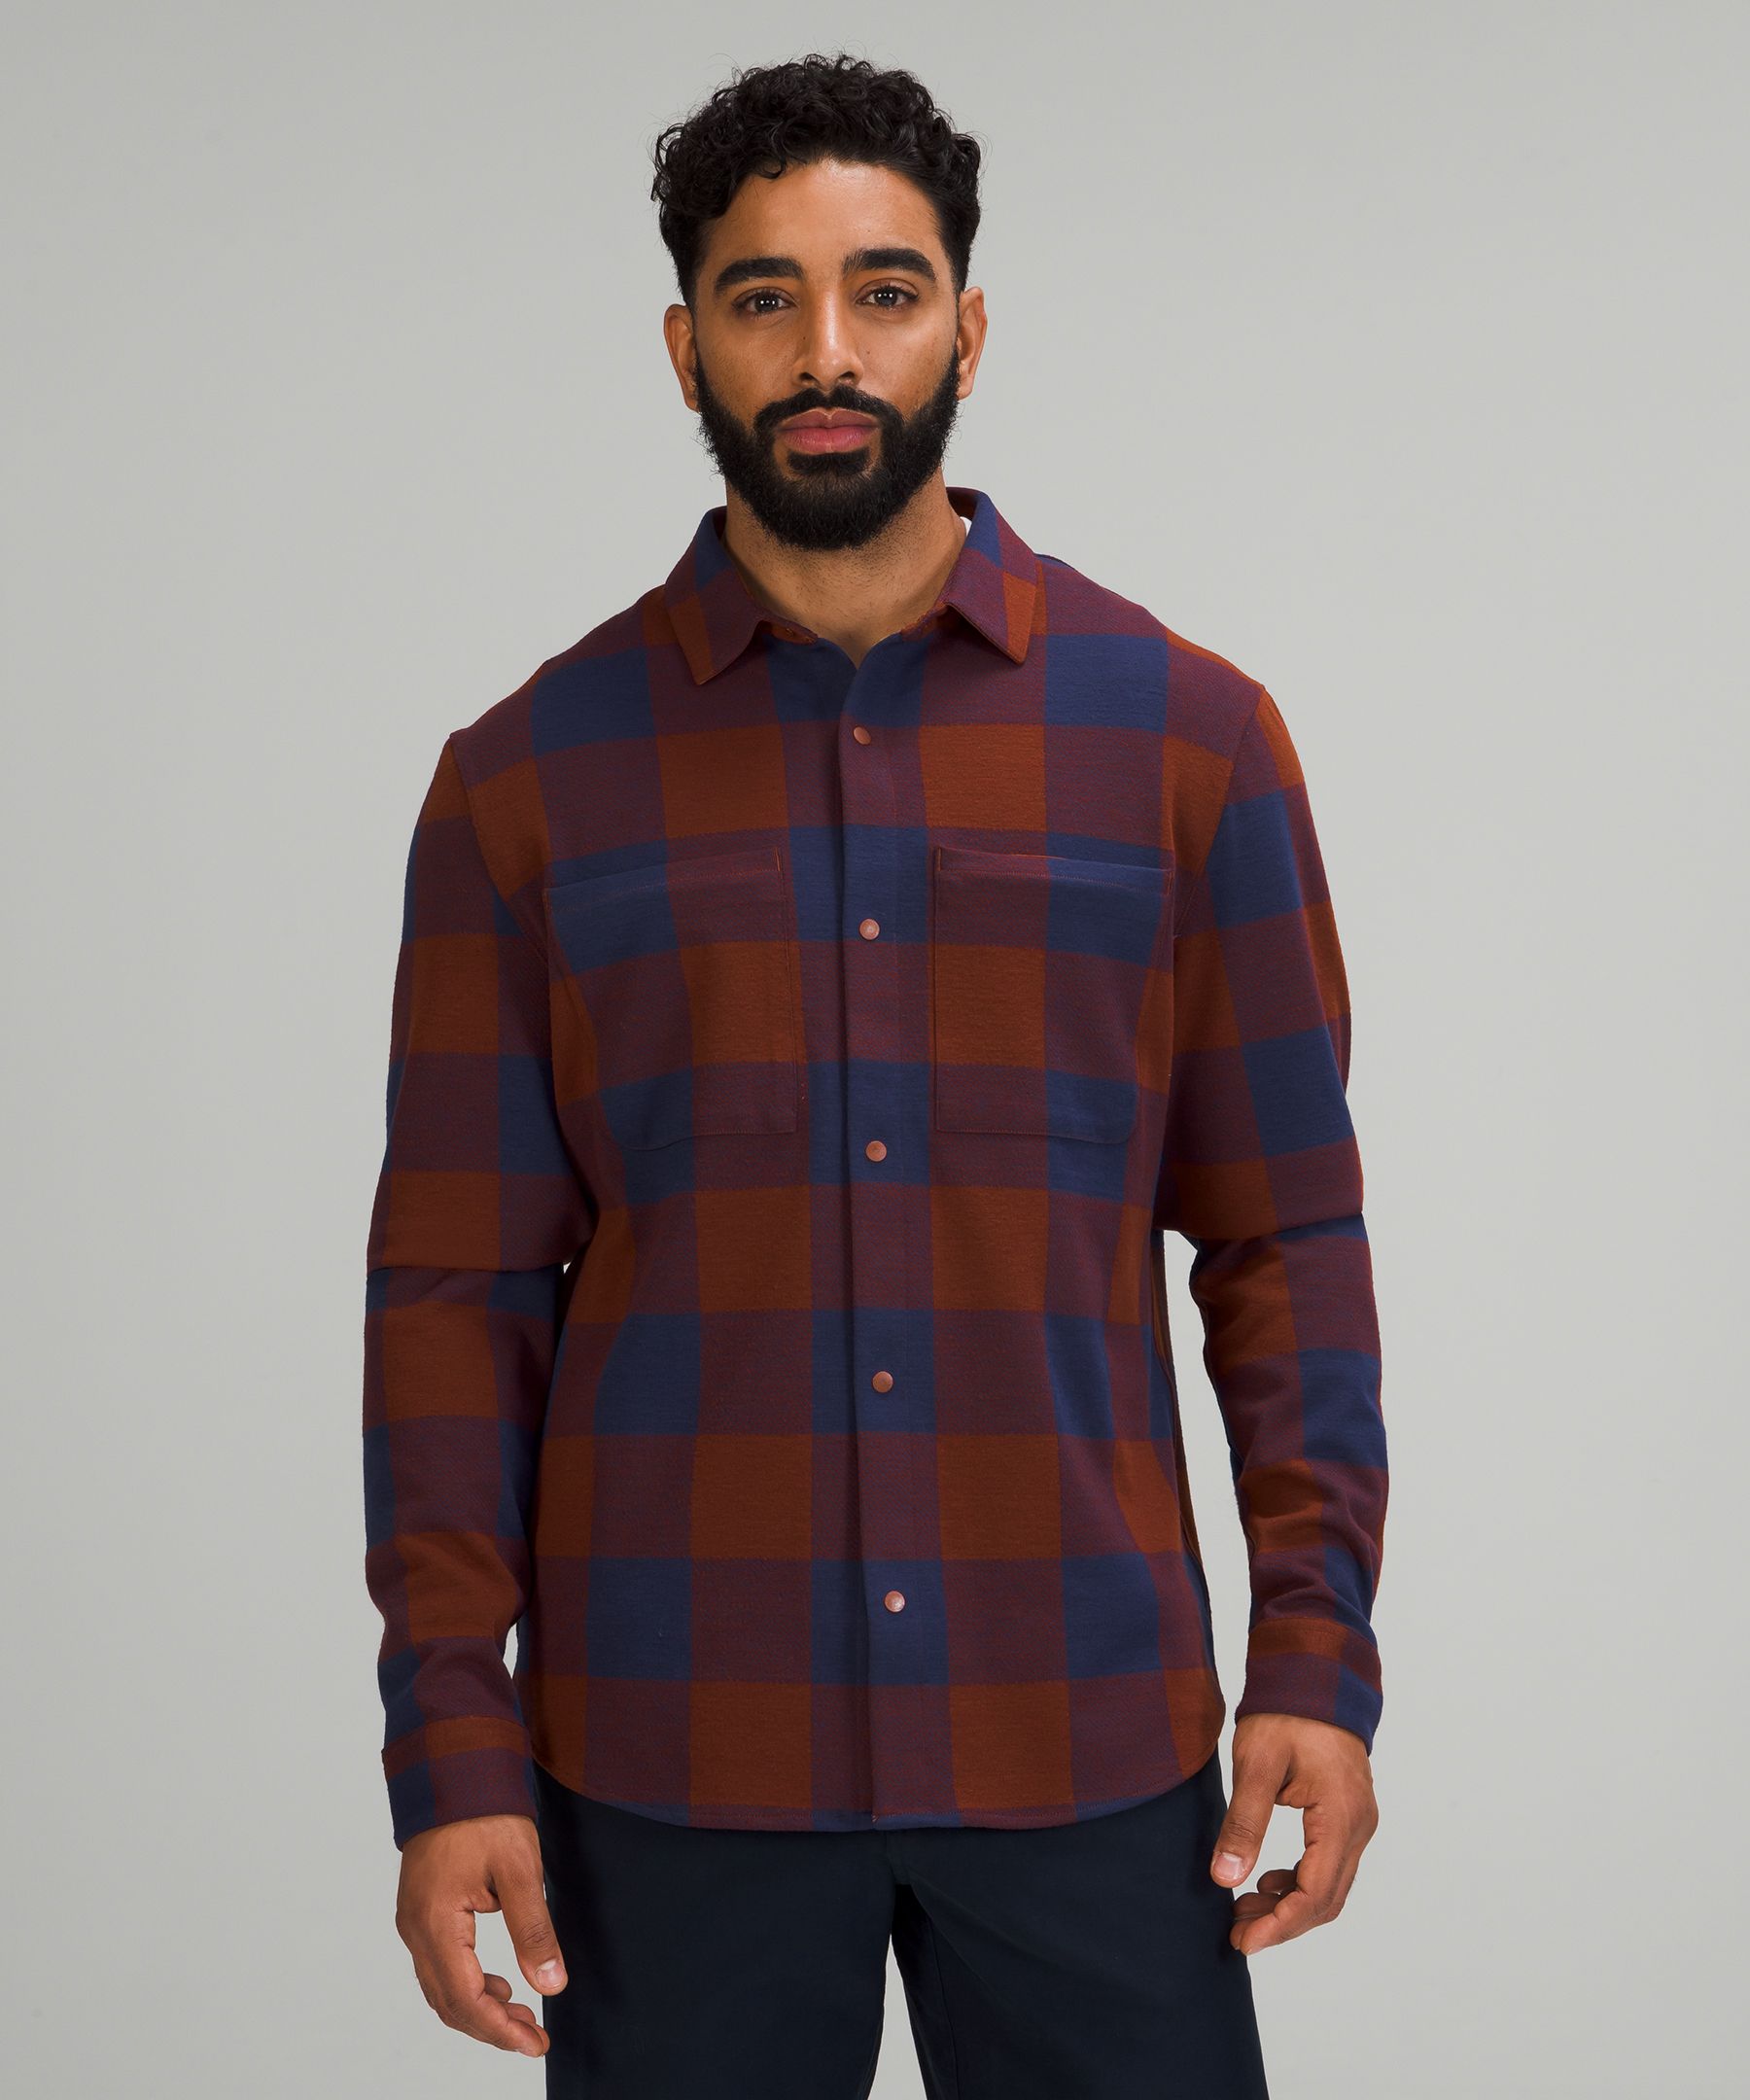 Lululemon Soft Knit Overshirt In Check Plaid Date Brown Night Sea